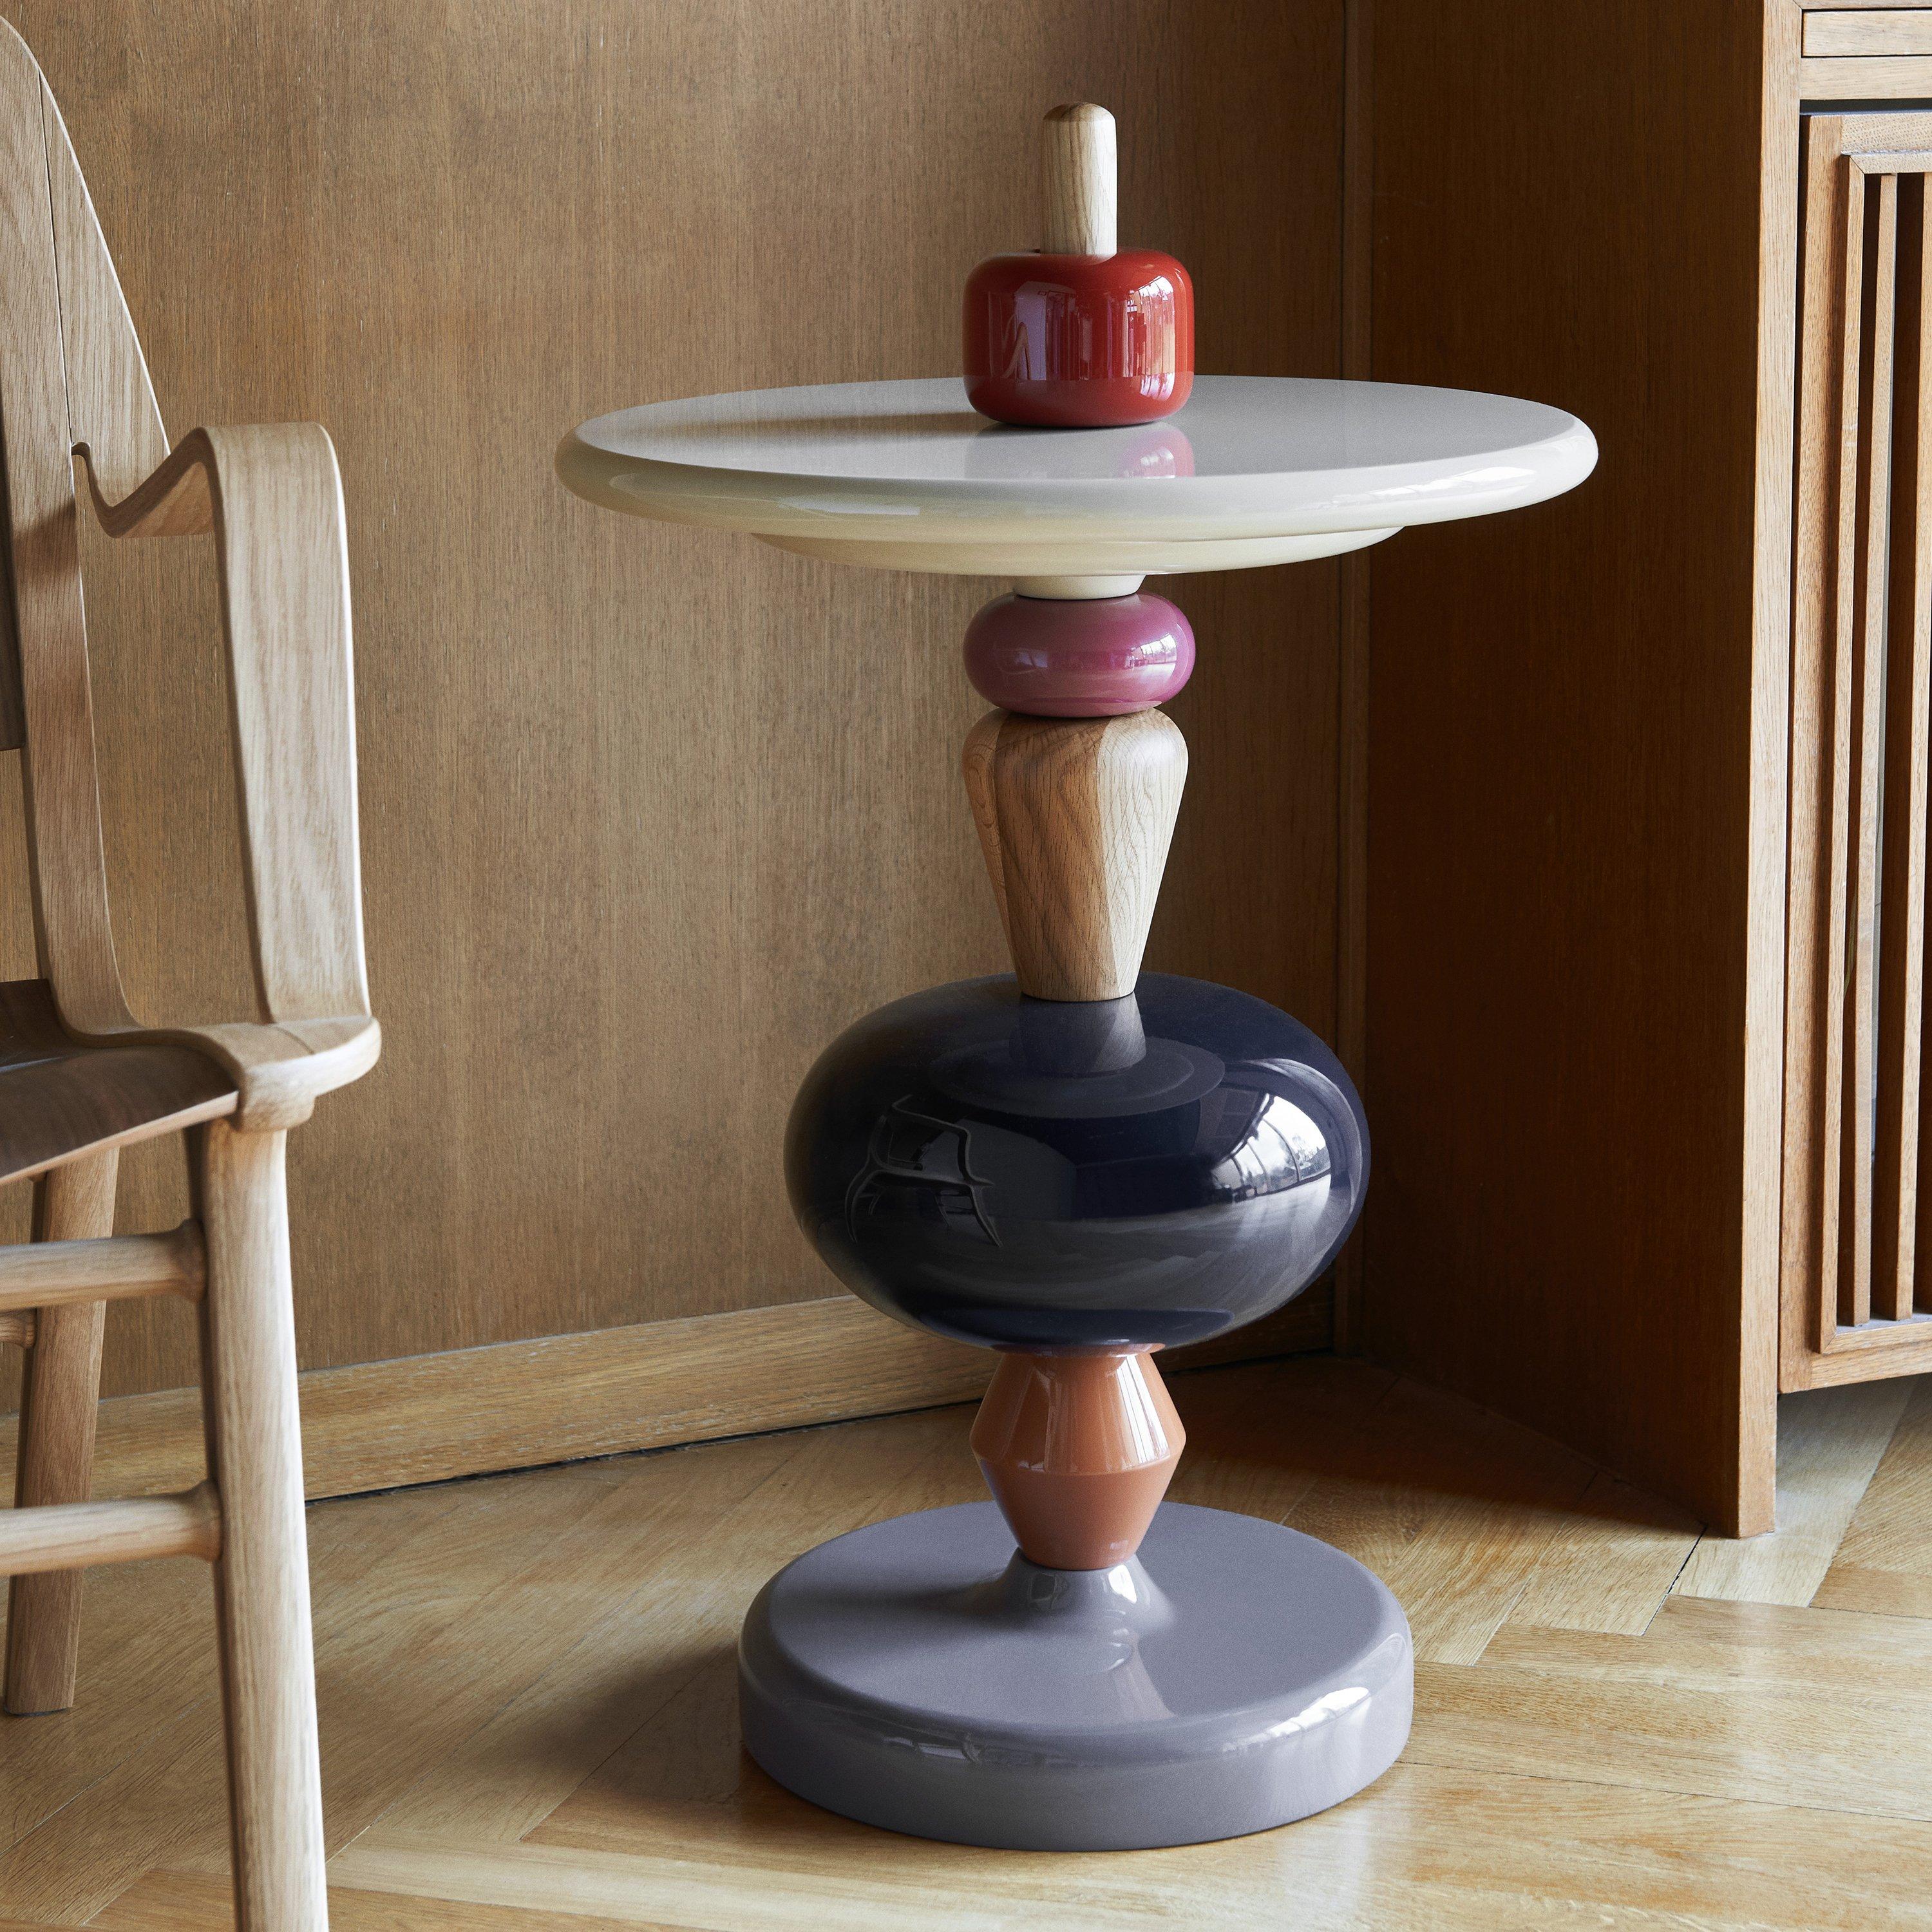 The shuffle side table in array colors seems to conjure images of classic wooden toys and with good reason. 
The choice of colors and the fact that you can unify and construct the table as you like are all ideas Mia Hamborg got from the Brio